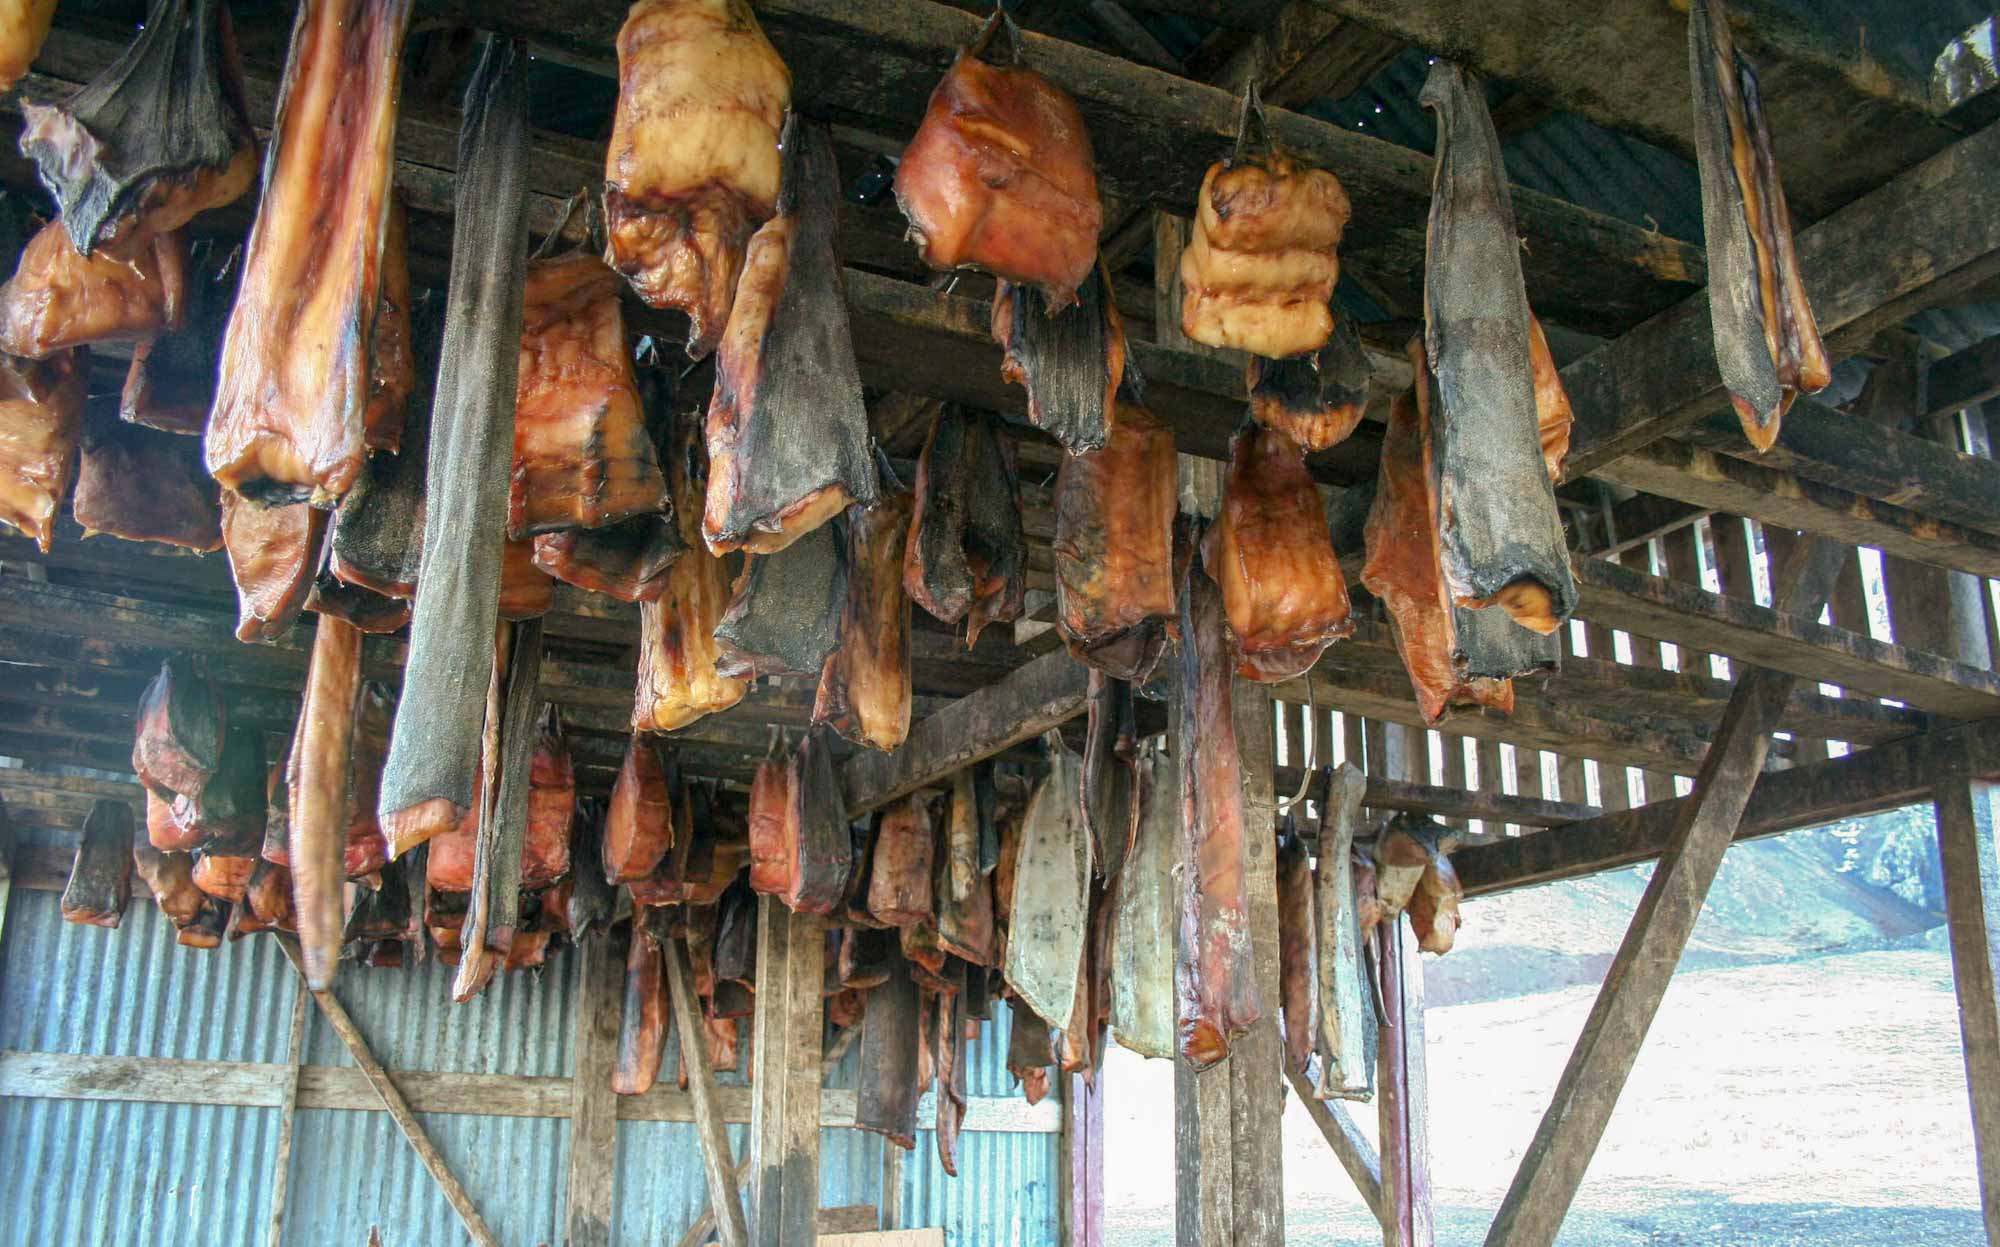 Hanging chunks of putrified greenland shark, in an open-sided shed